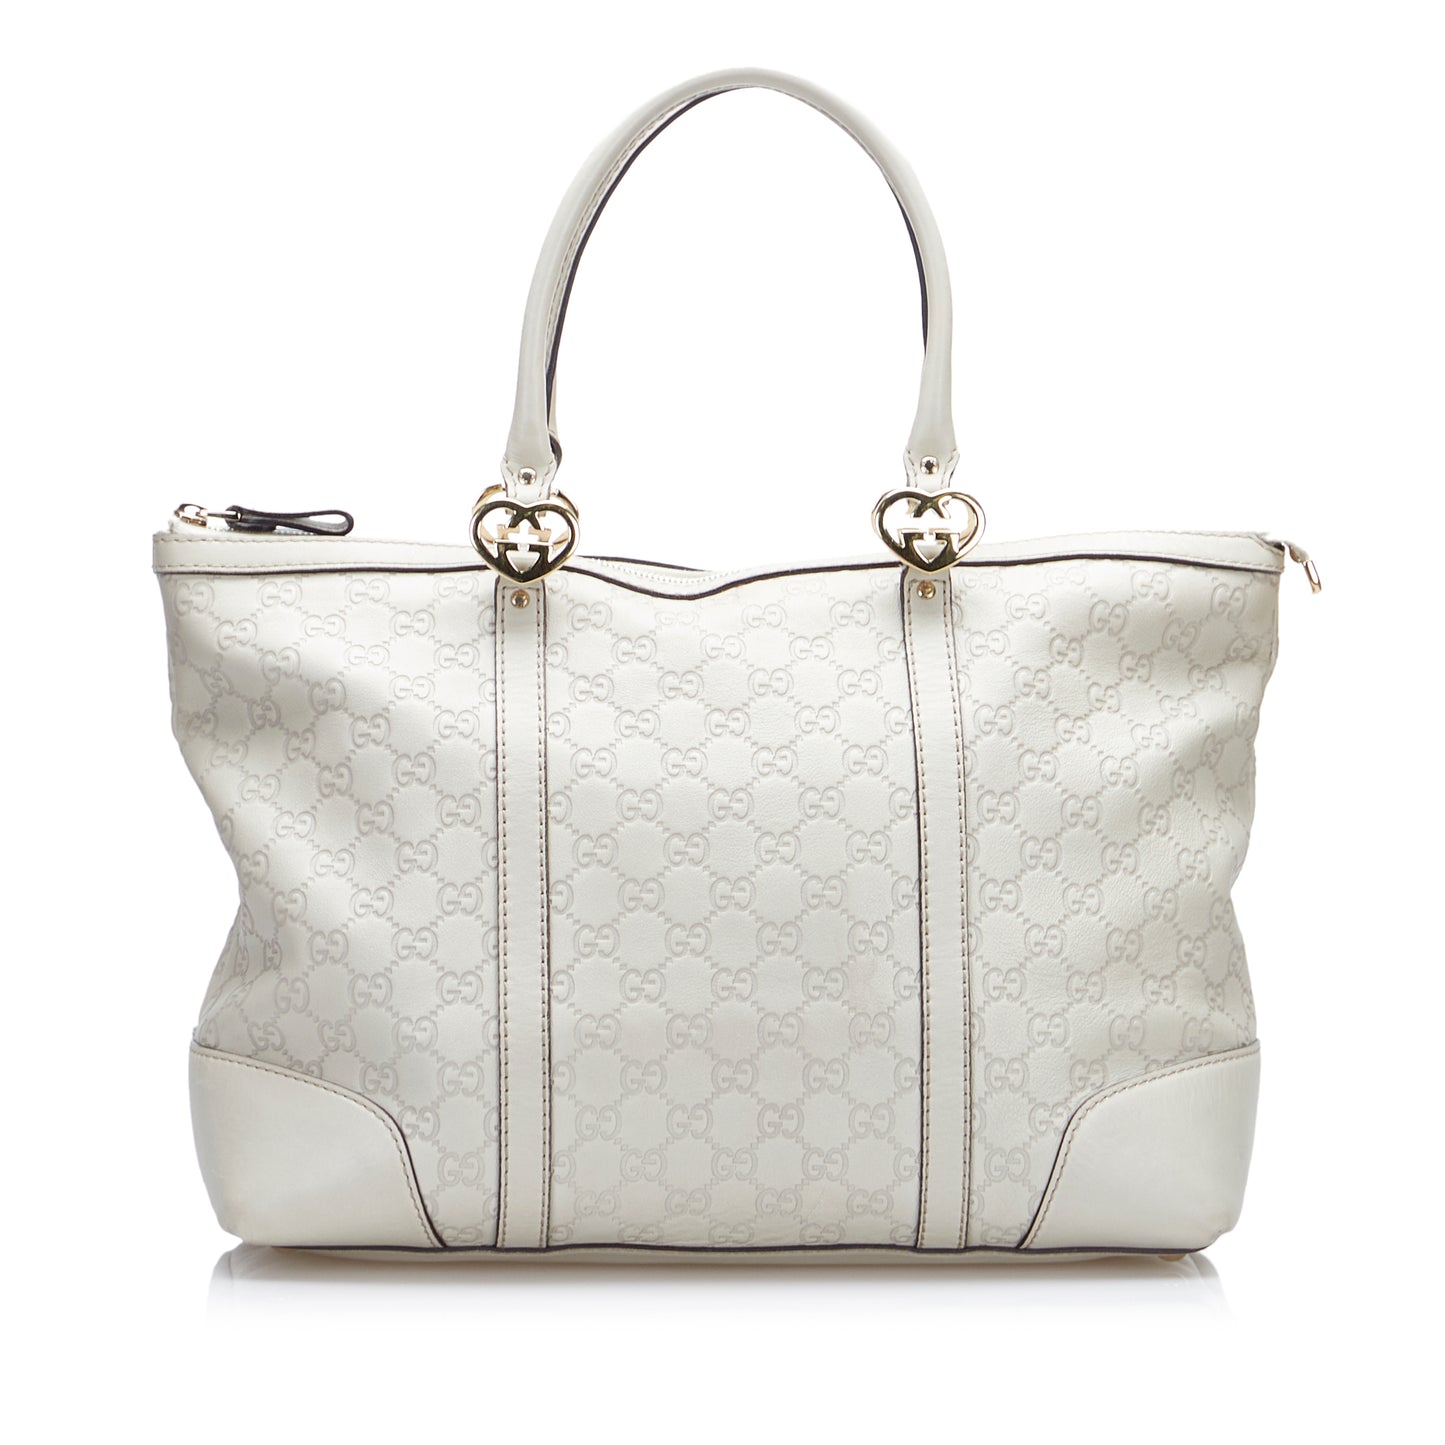 Guccissima Lovely Tote